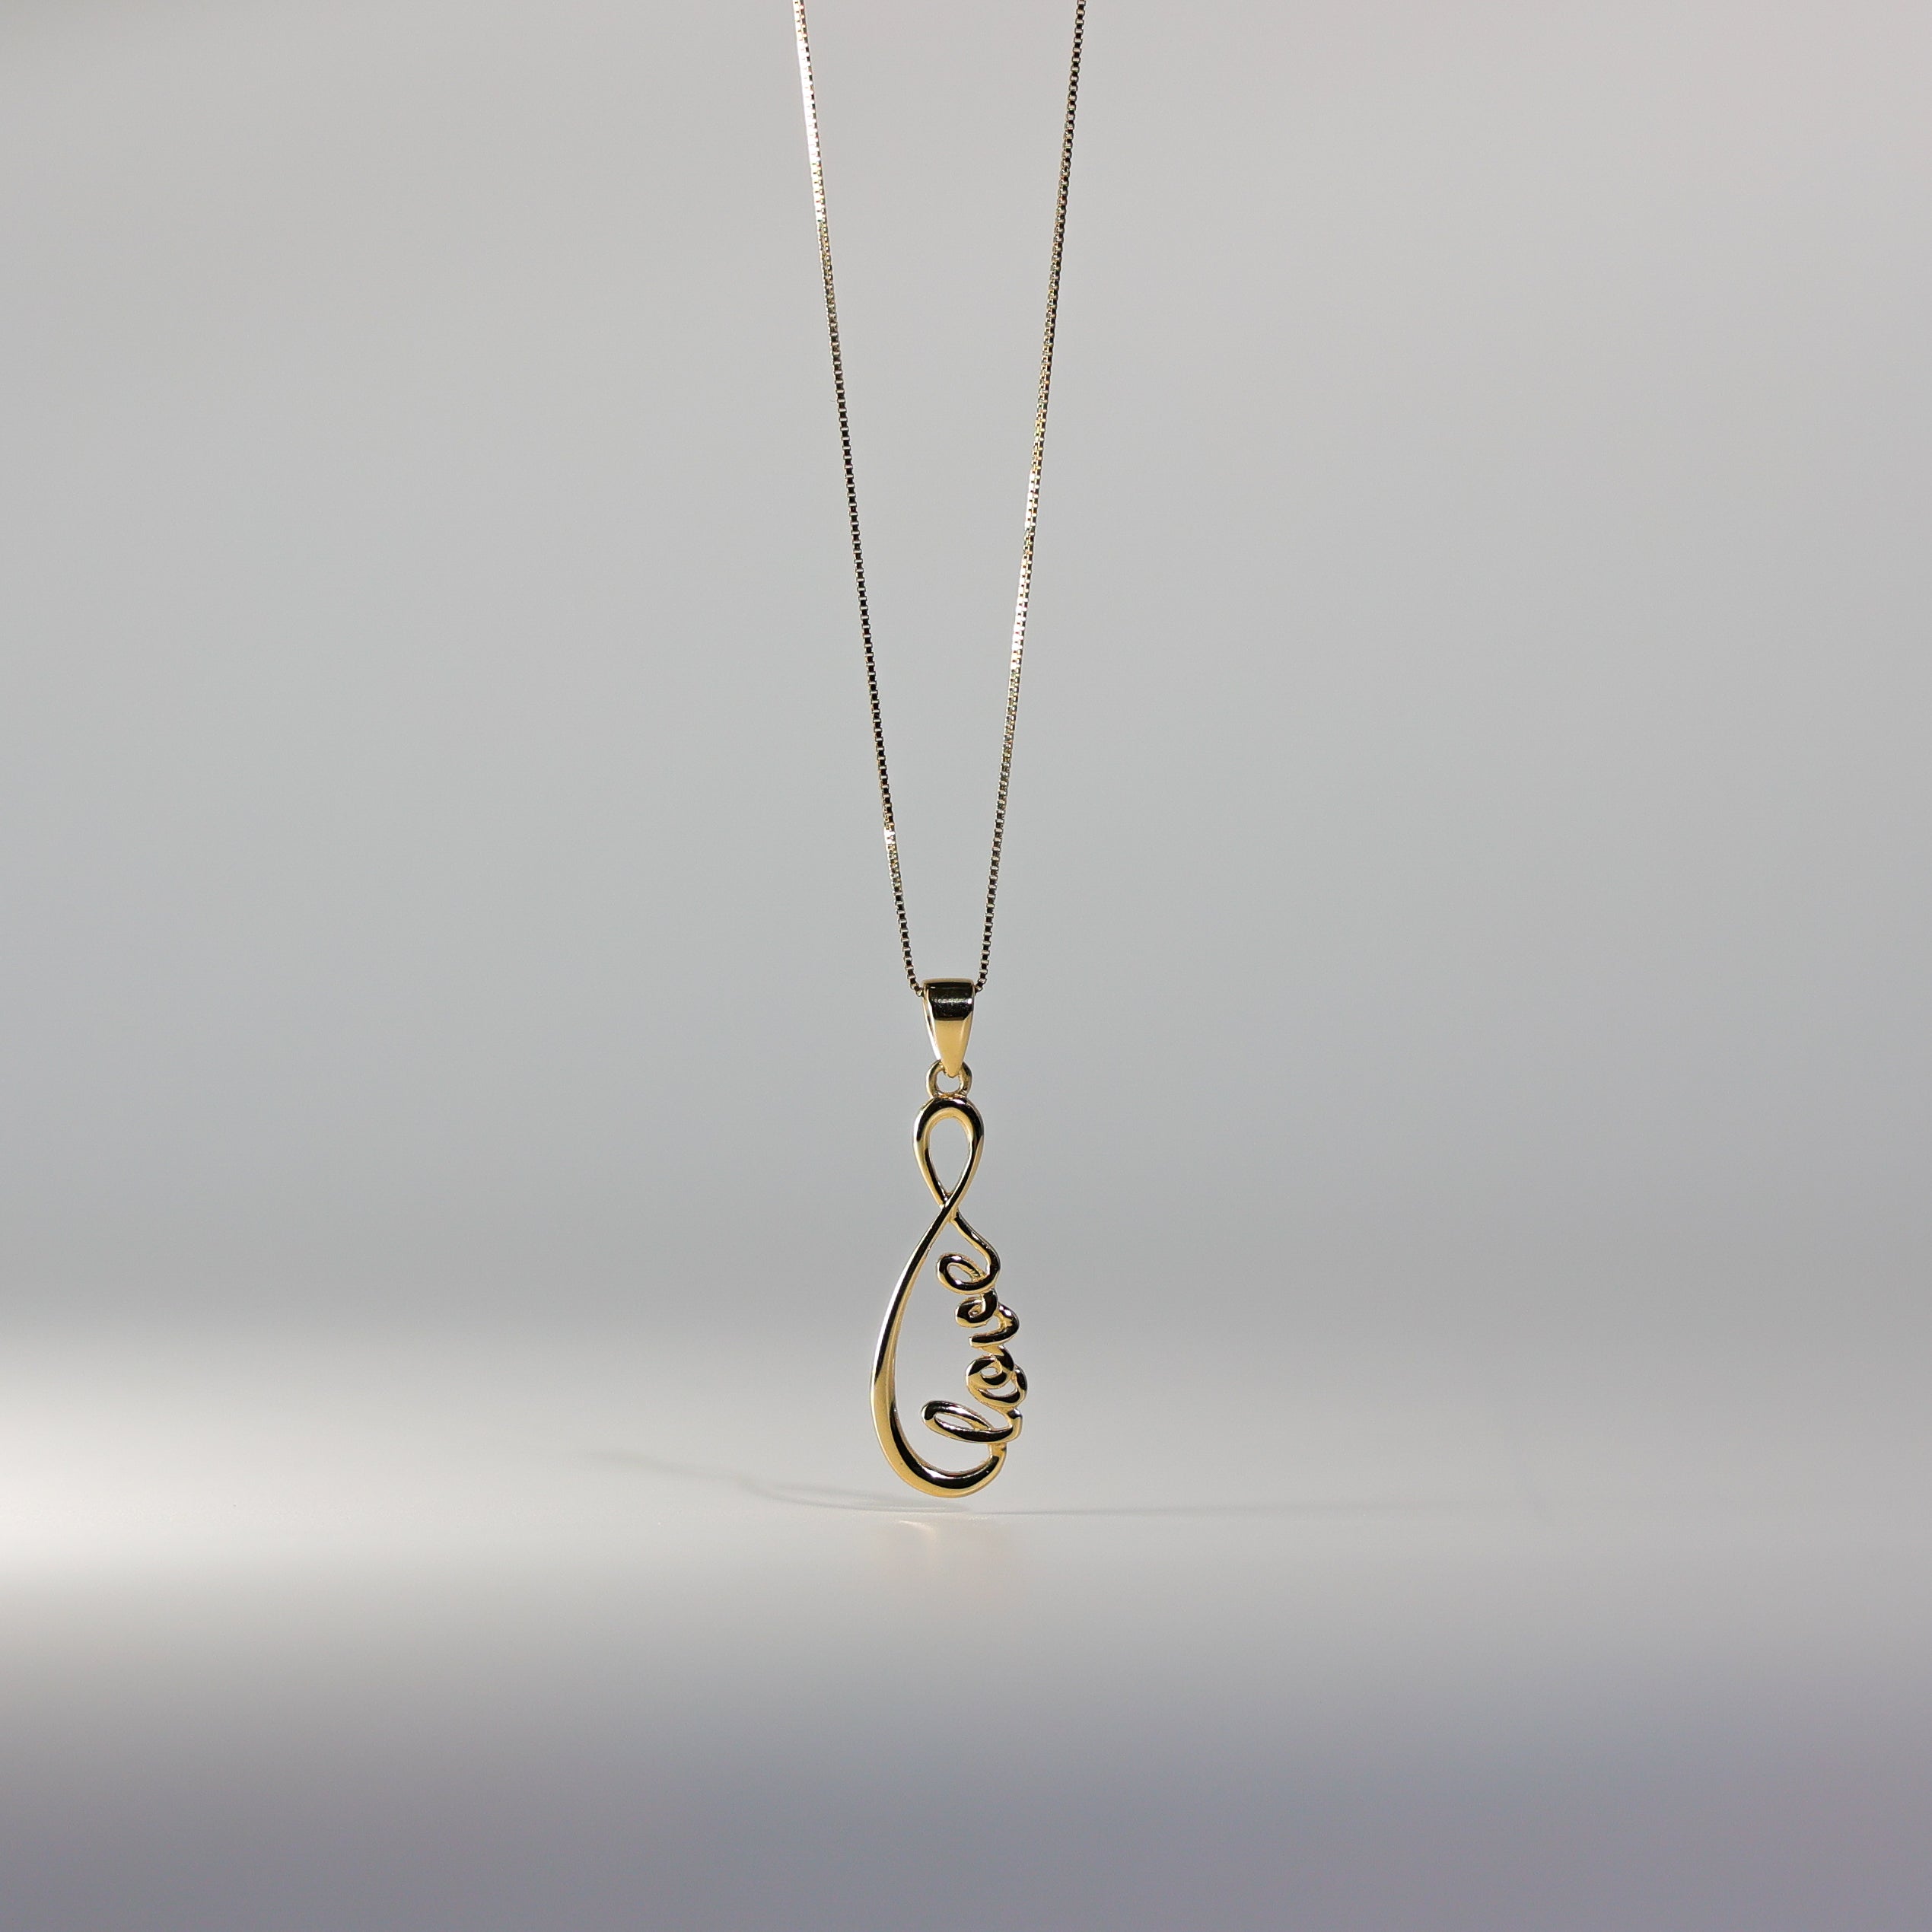 Gold Love Infinity Pendant Model-2370 - Charlie & Co. Jewelry